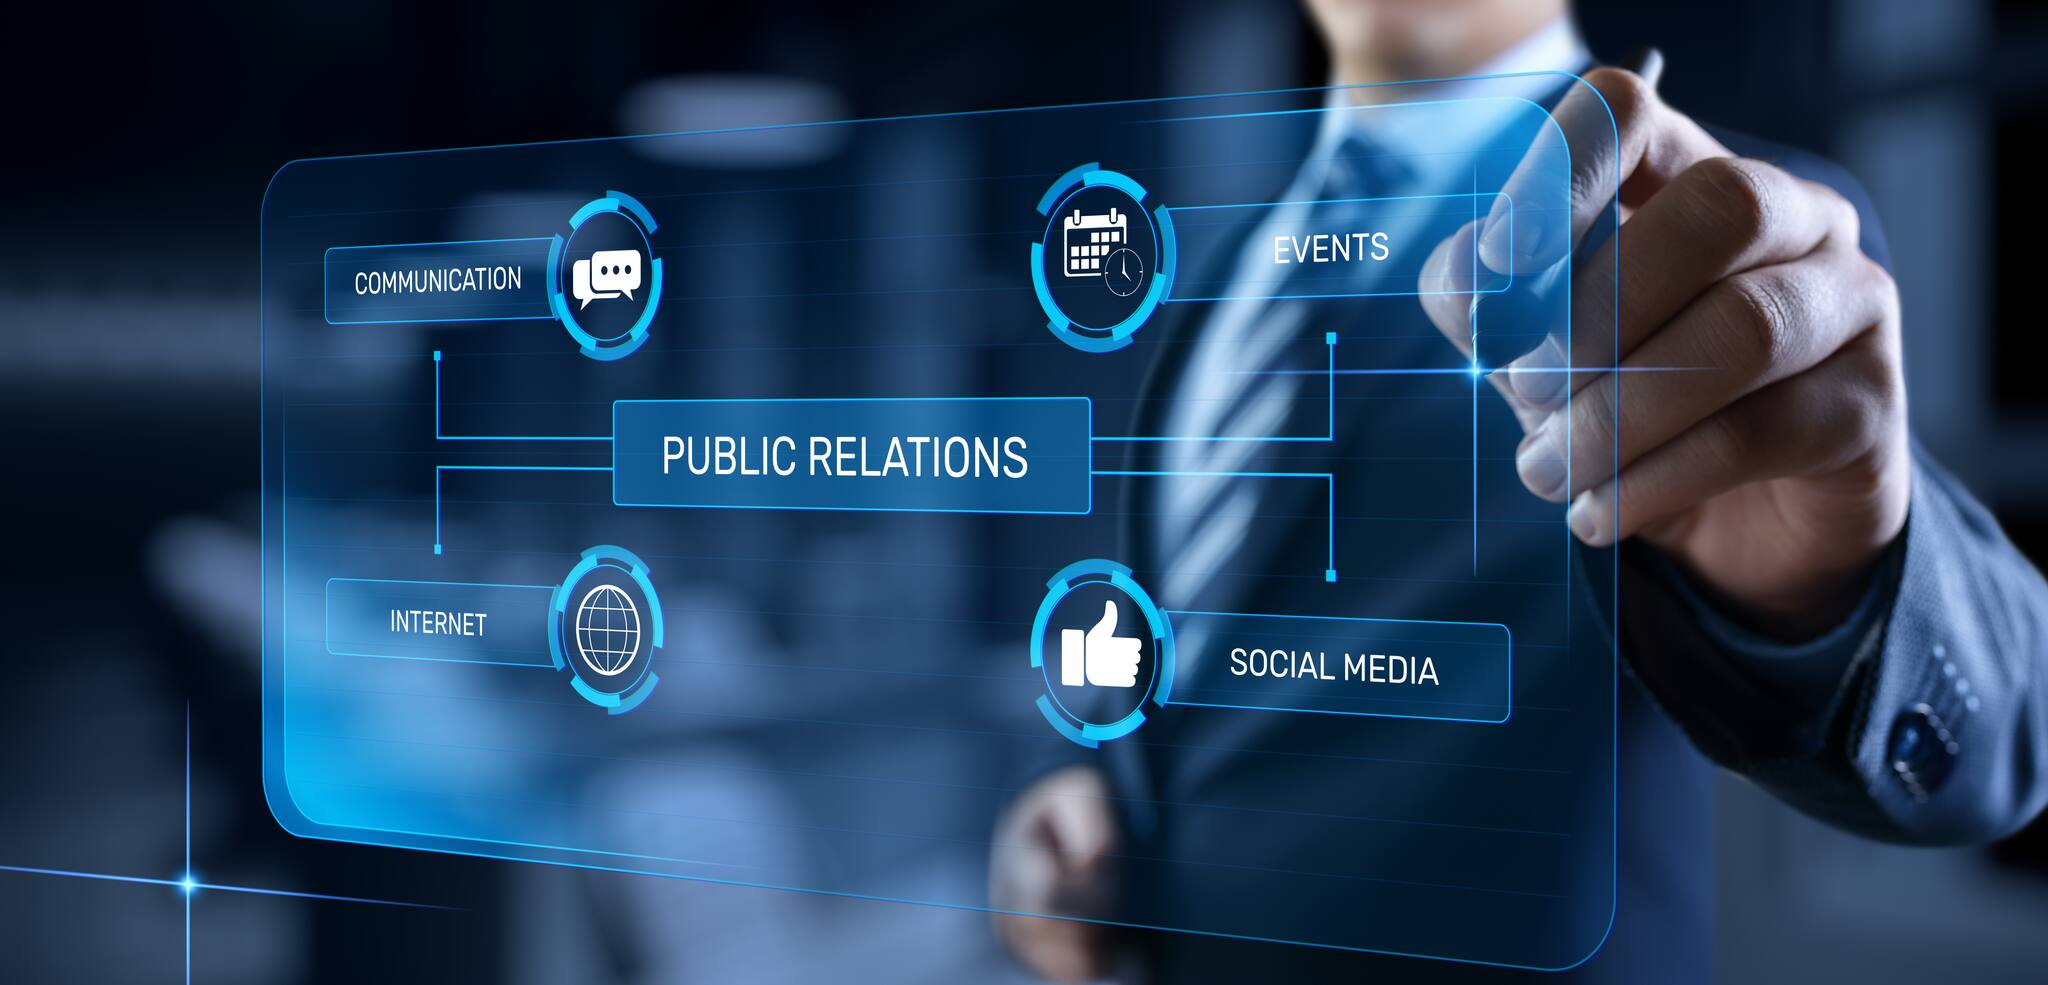 Advertising or public relations—what’s better for SMEs?